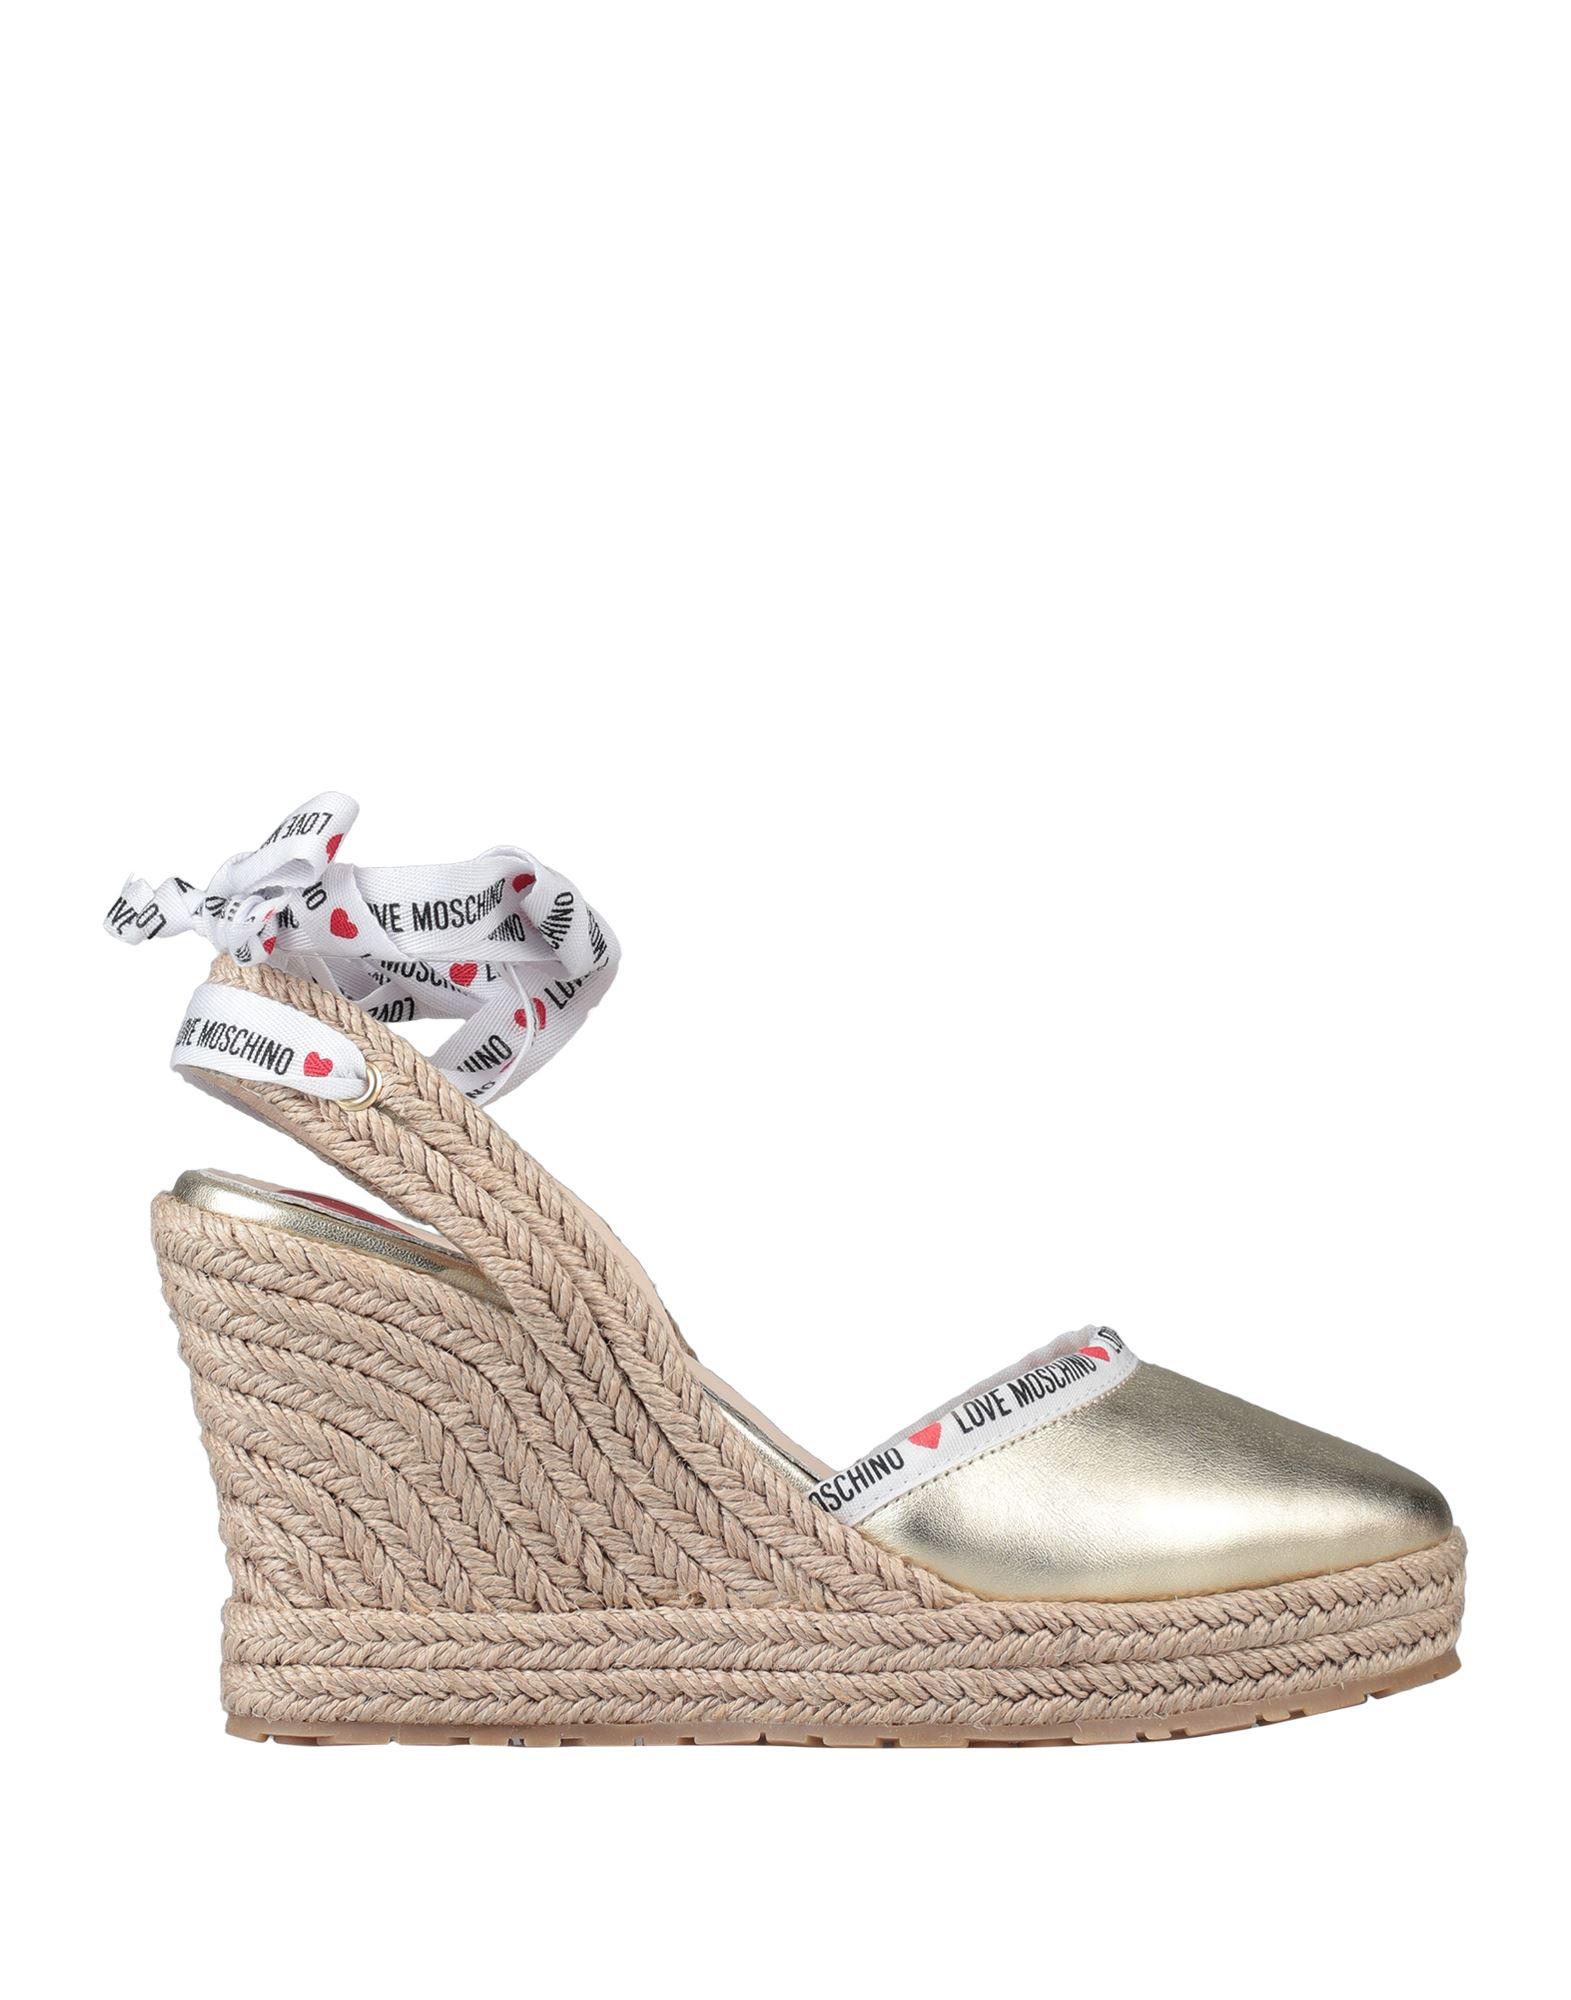 Love Moschino Leather Espadrilles in Gold (Metallic) - Lyst